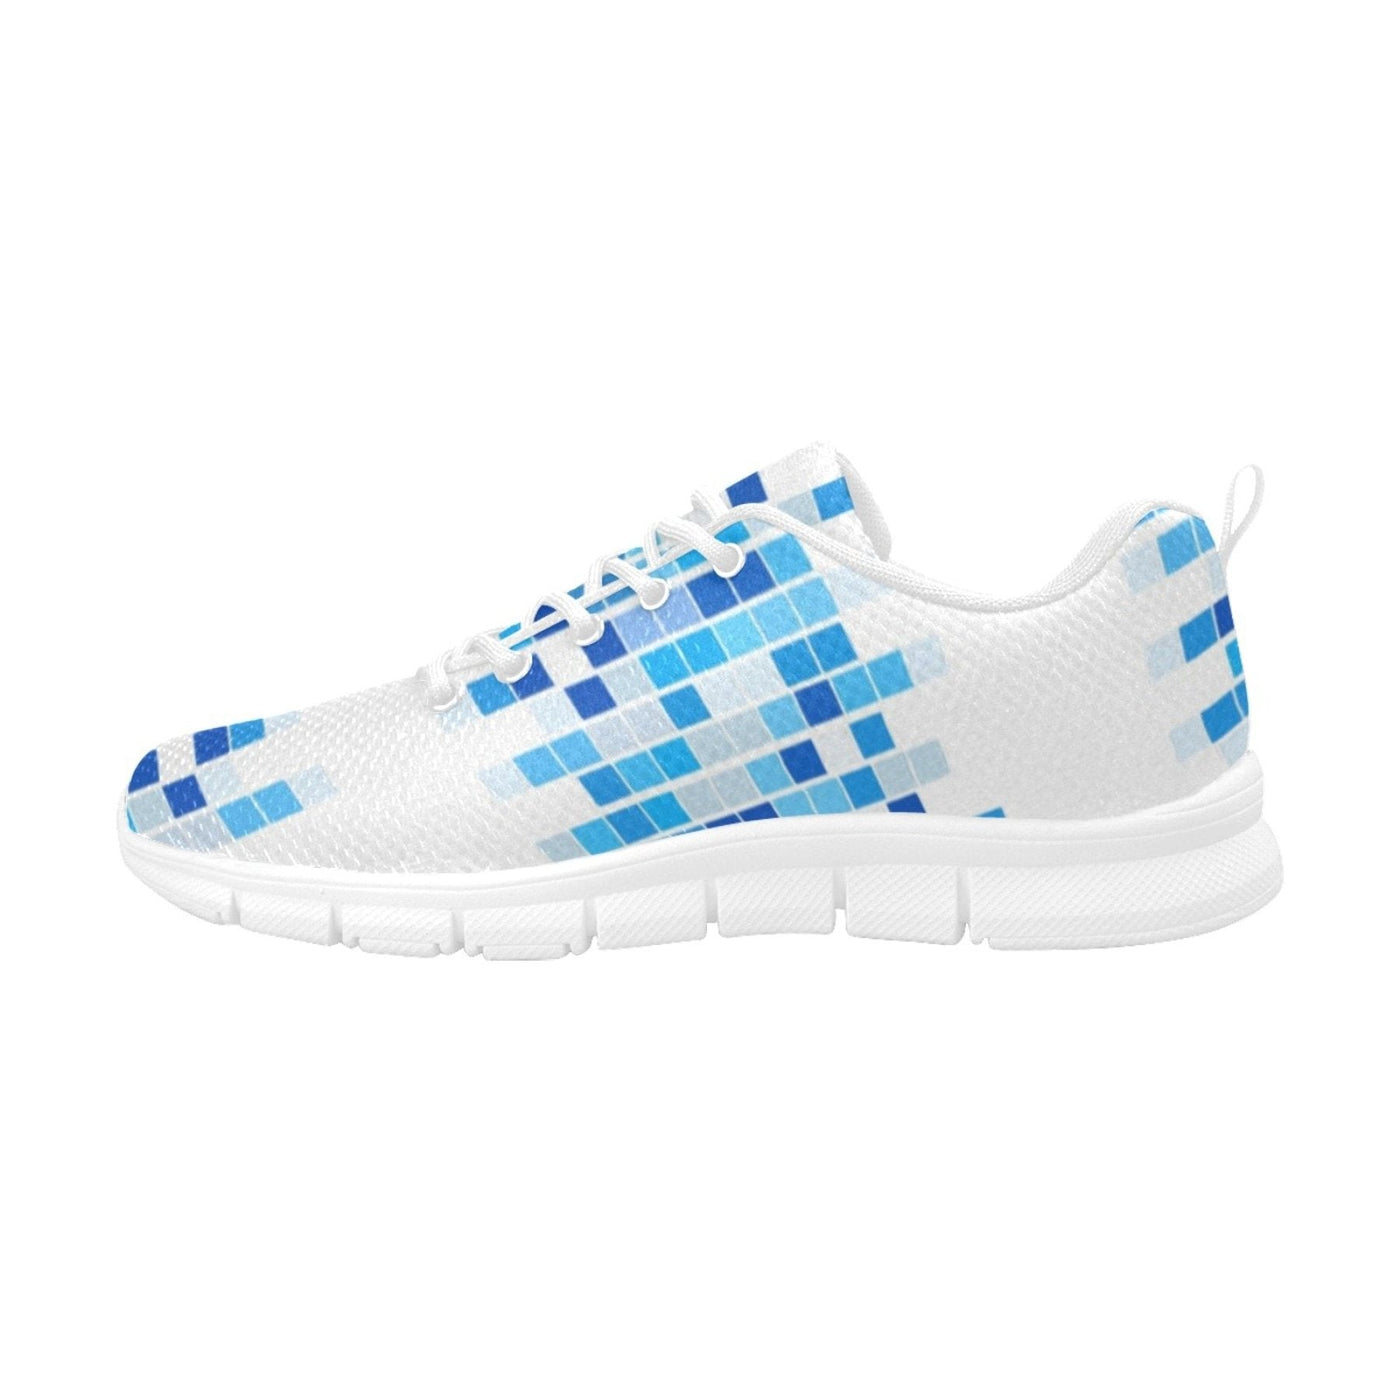 Sneakers For Women Blue And White Mosaic Print - Running Shoes - Womens |